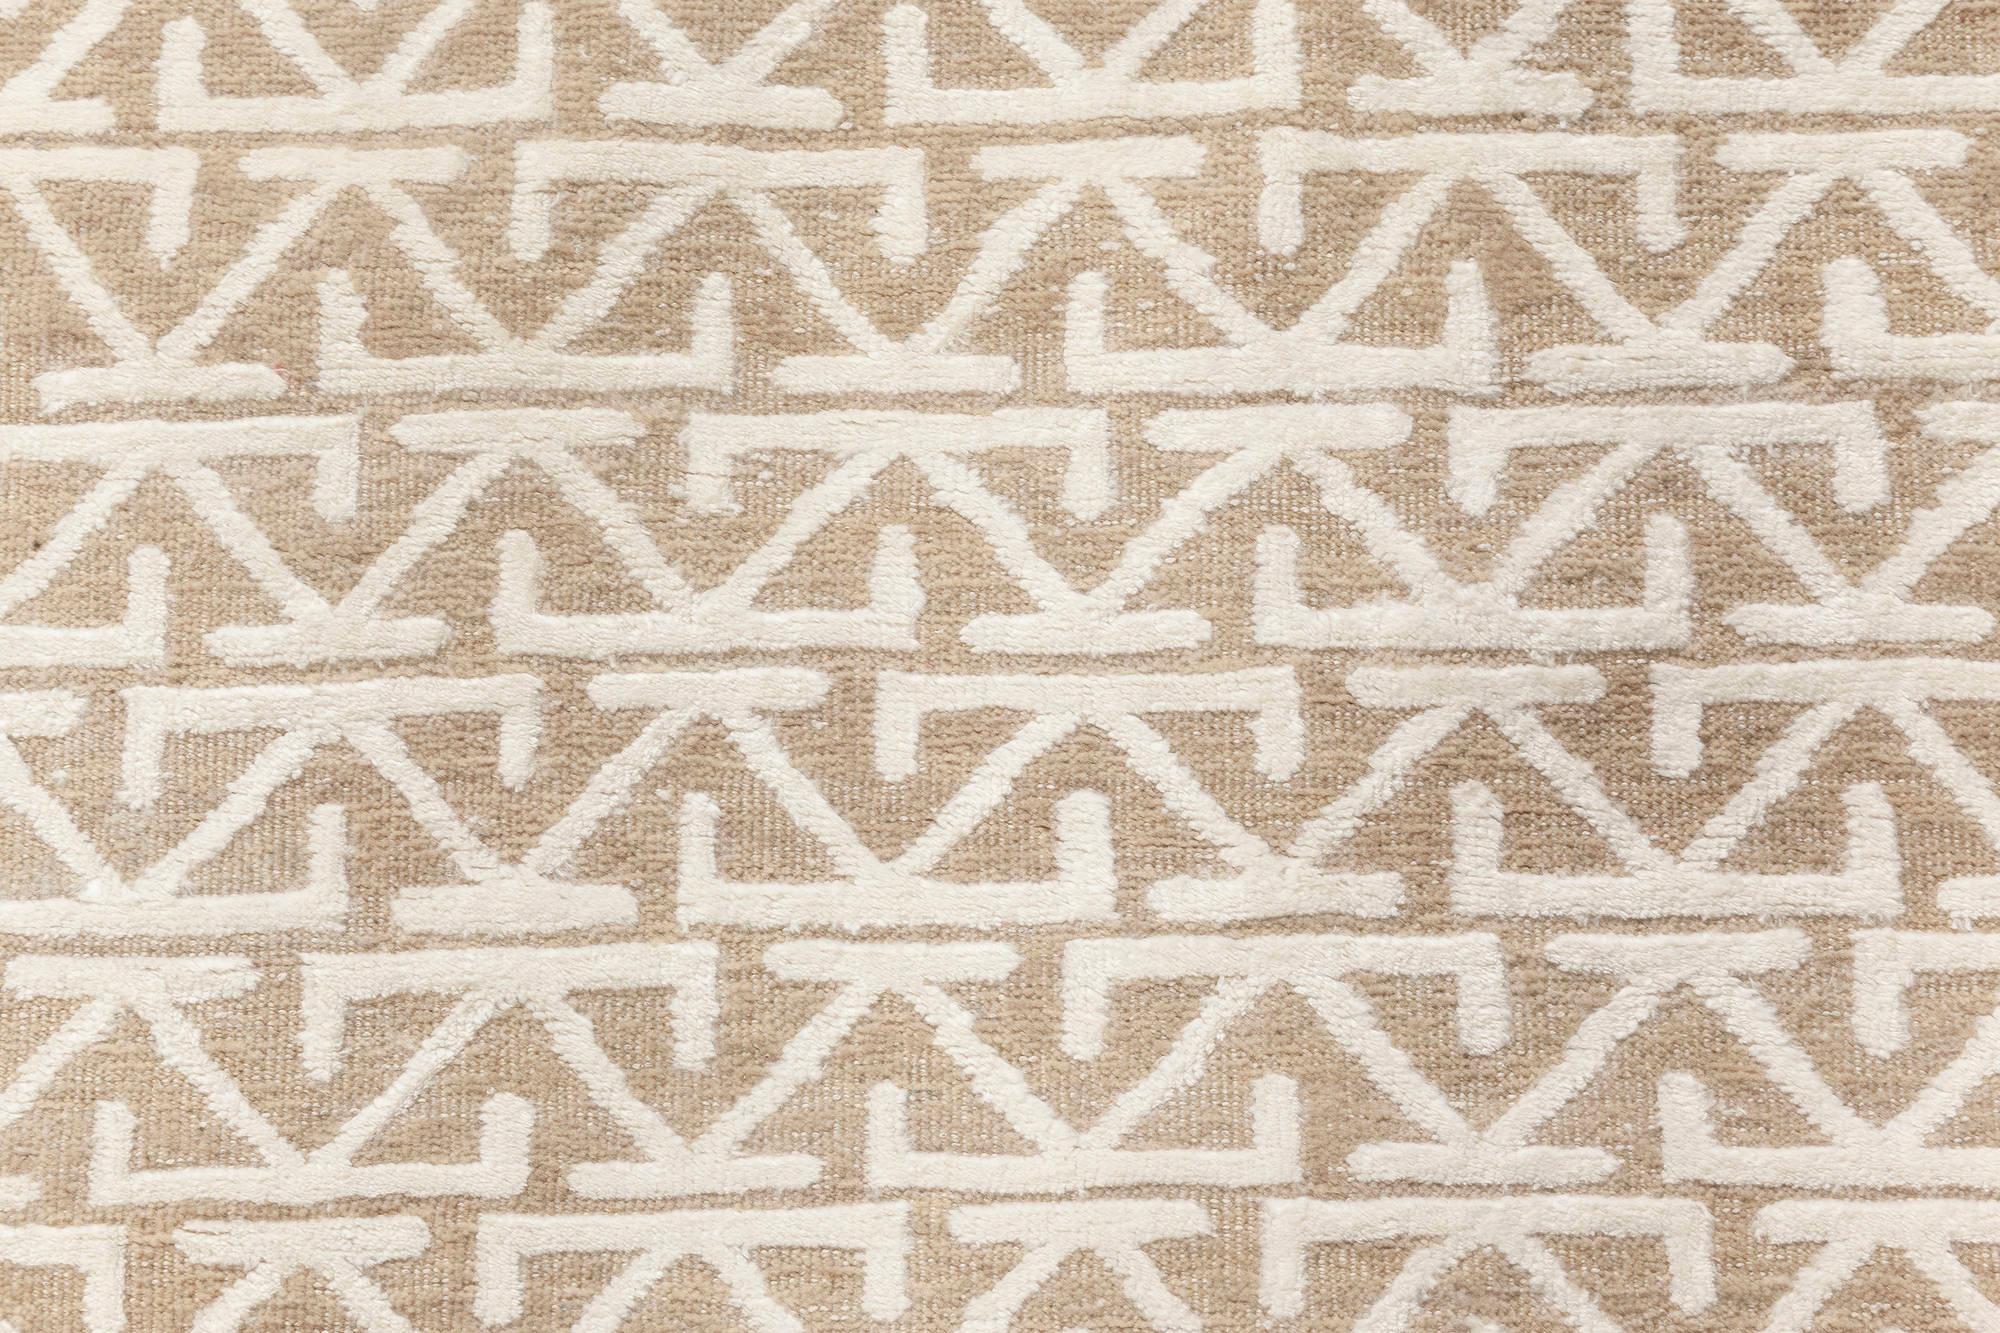 Contemporary oriental inspired beige and white rug by Doris Leslie Blau.
Size: 10'9